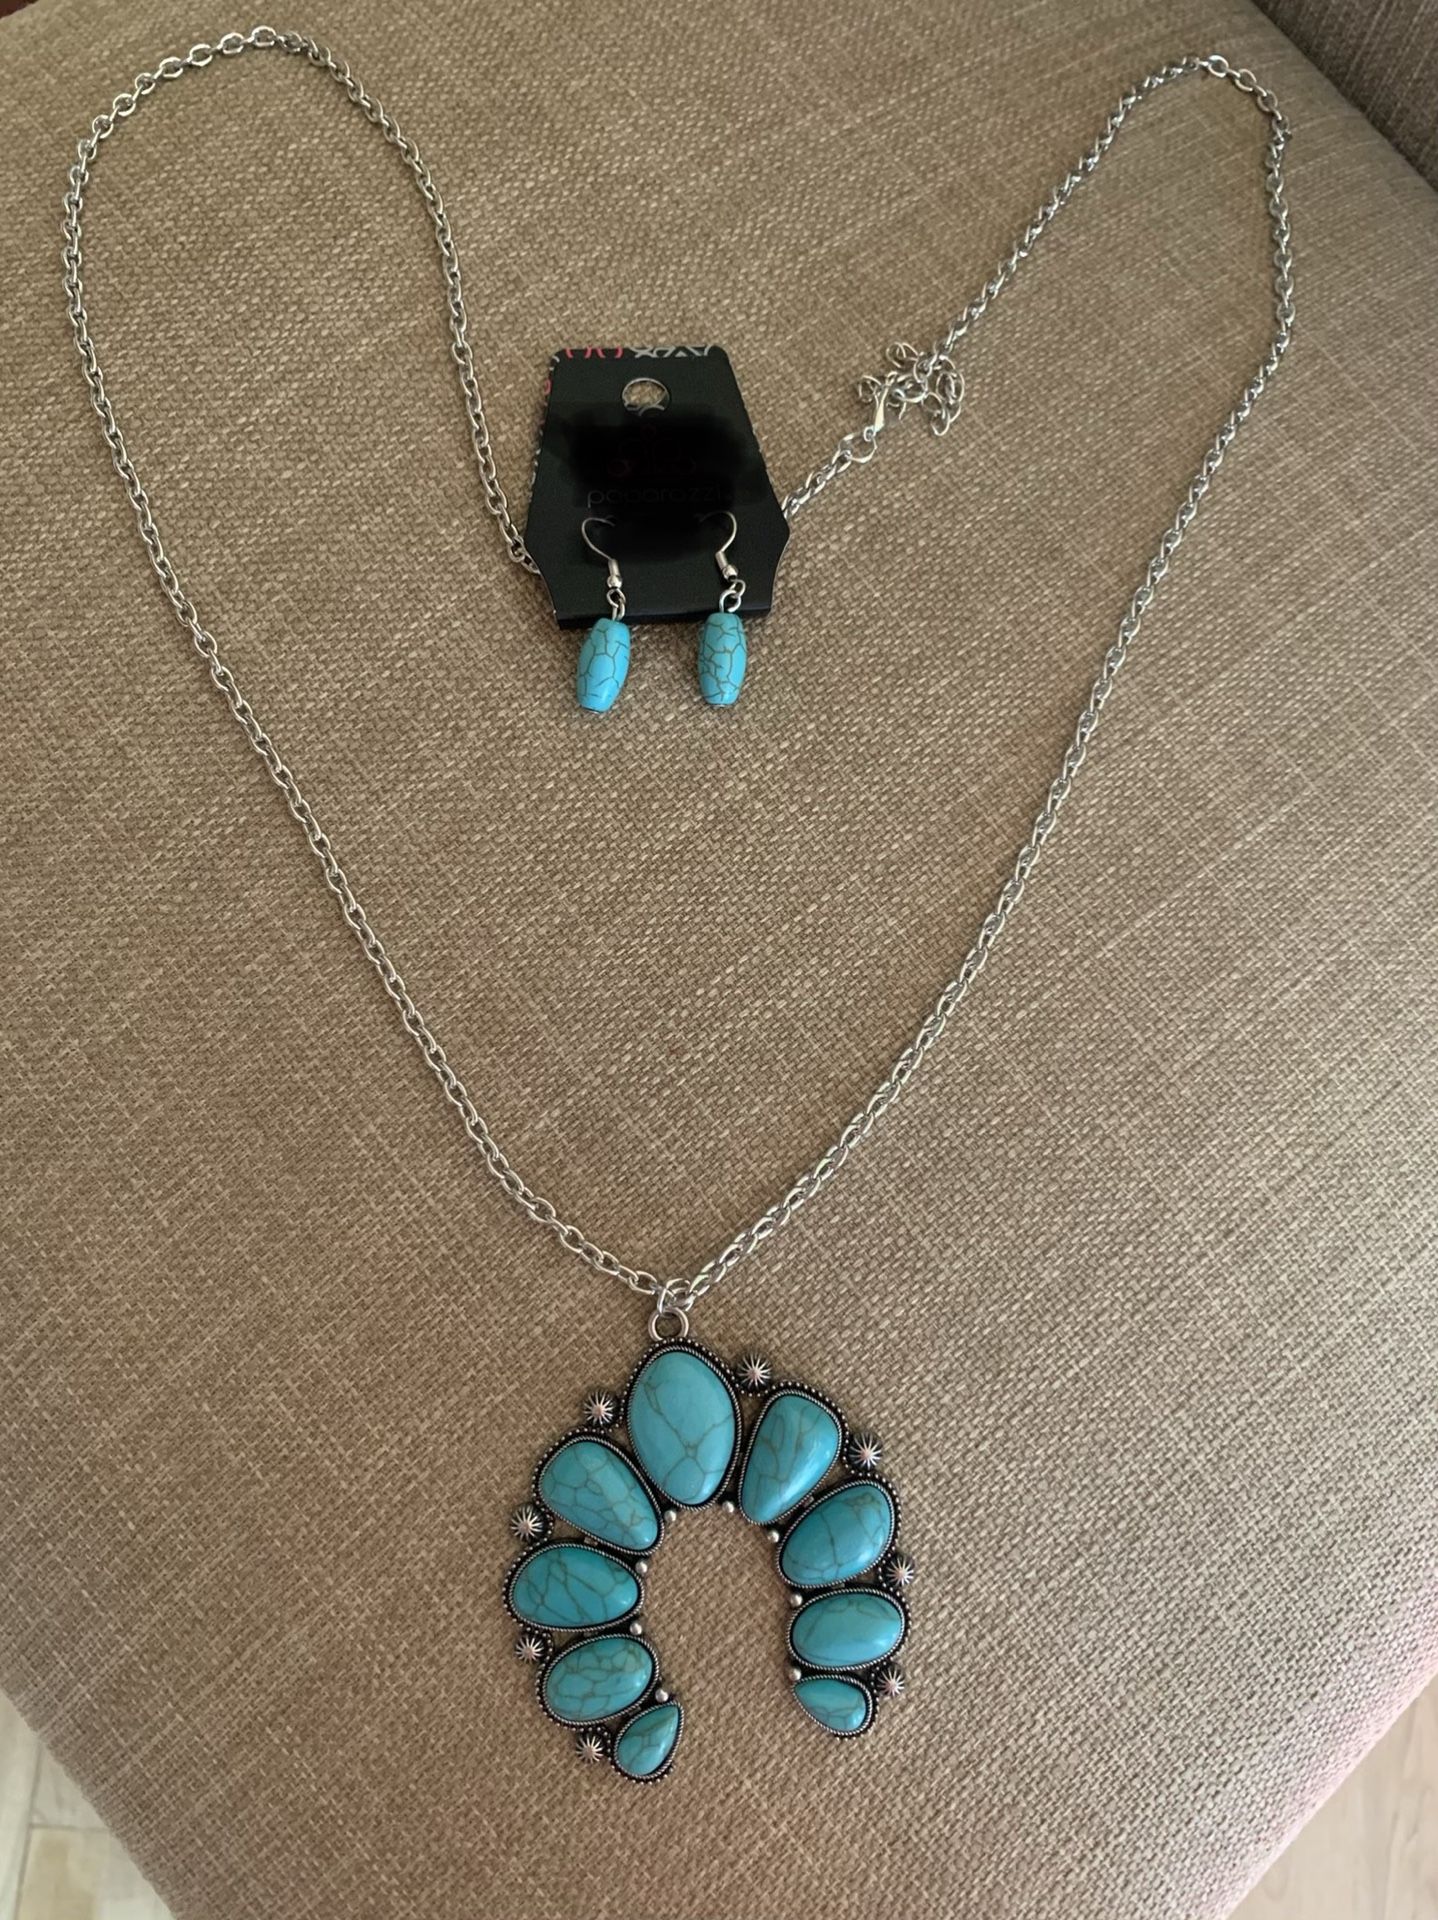 Teal with Silver long Necklace & matching earrings